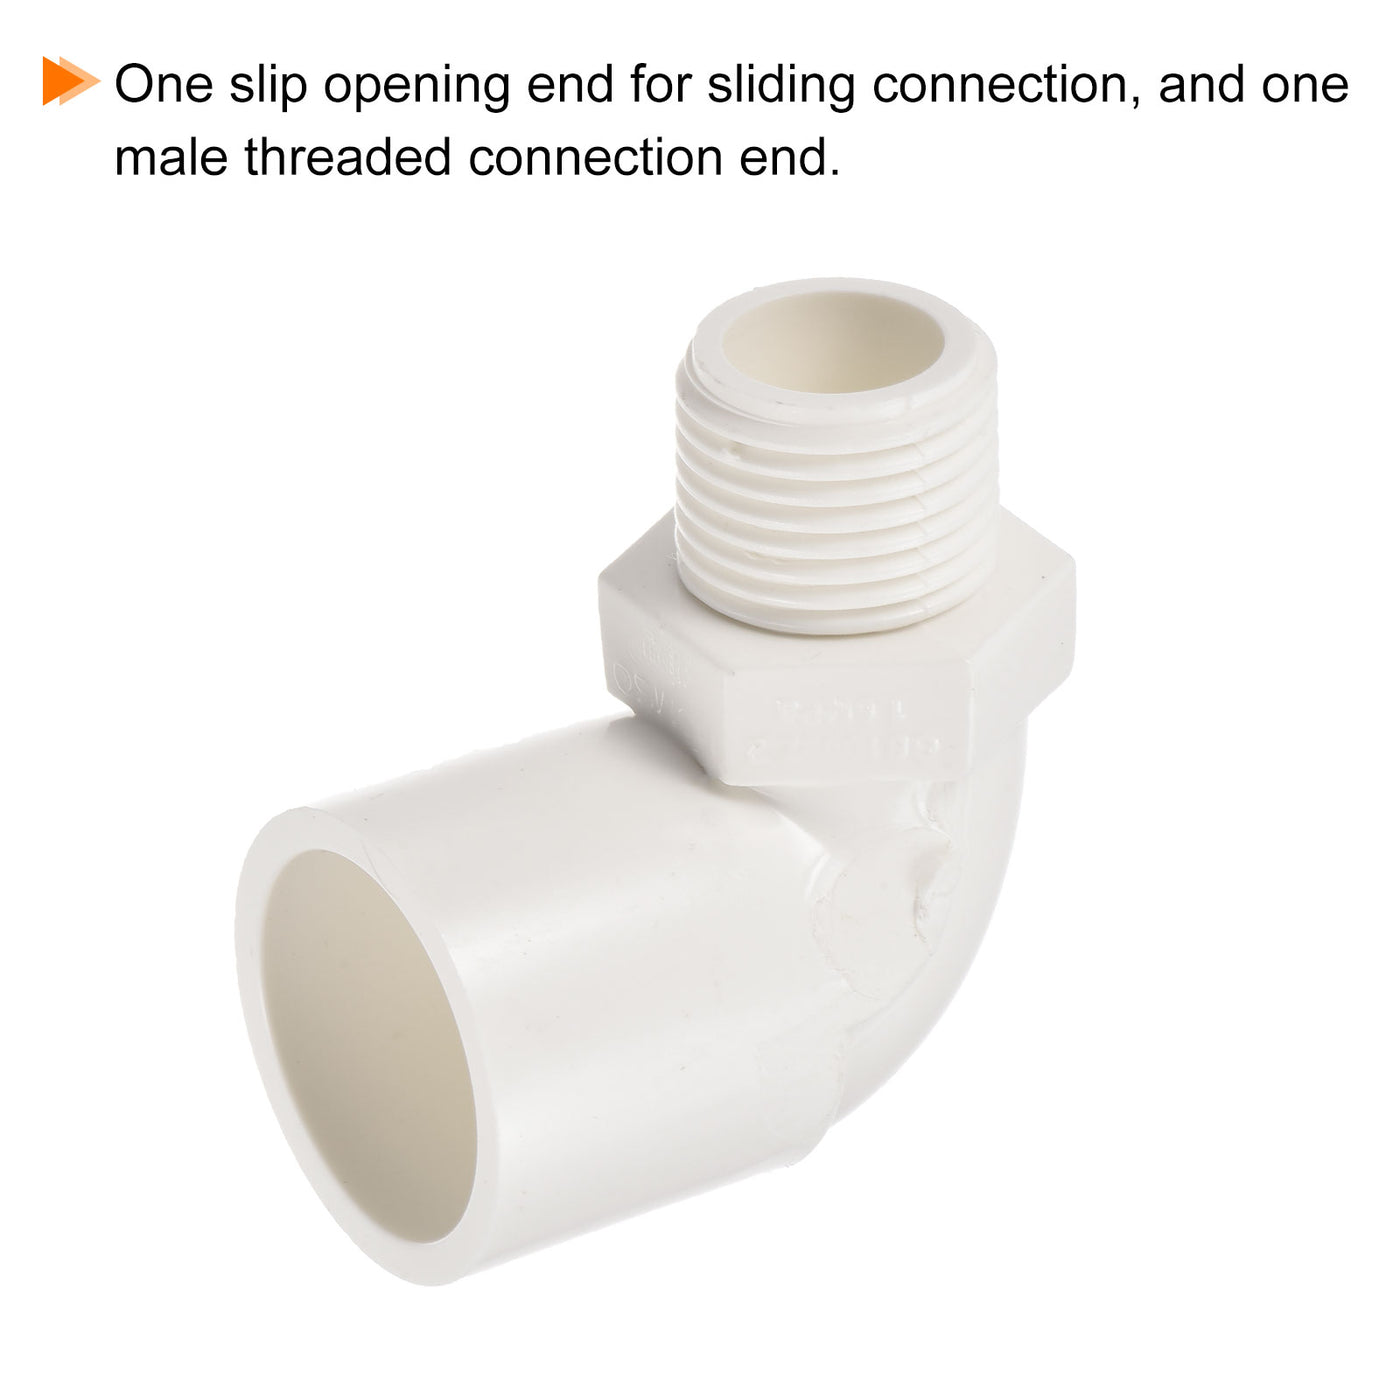 Harfington PVC Water Pipe Elbow Fitting G1/2 Male Thread 25mm ID Tube Connector Adapter, White Pack of 3